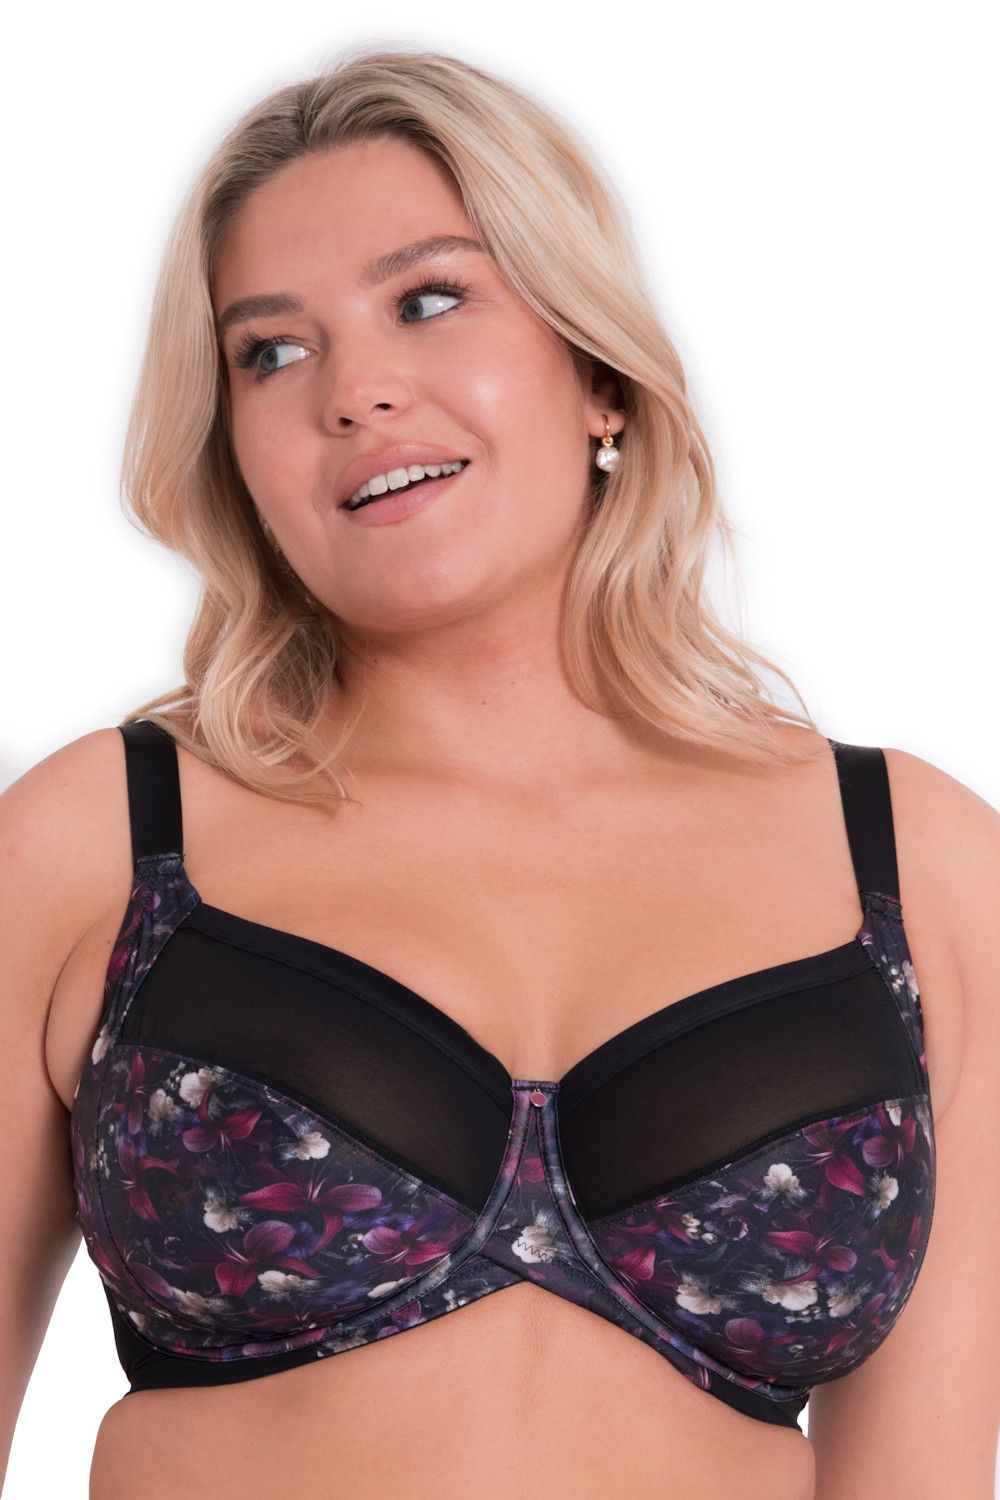 Top Women Plus Size Bras For Big Busted 120 115 110 105 100 95